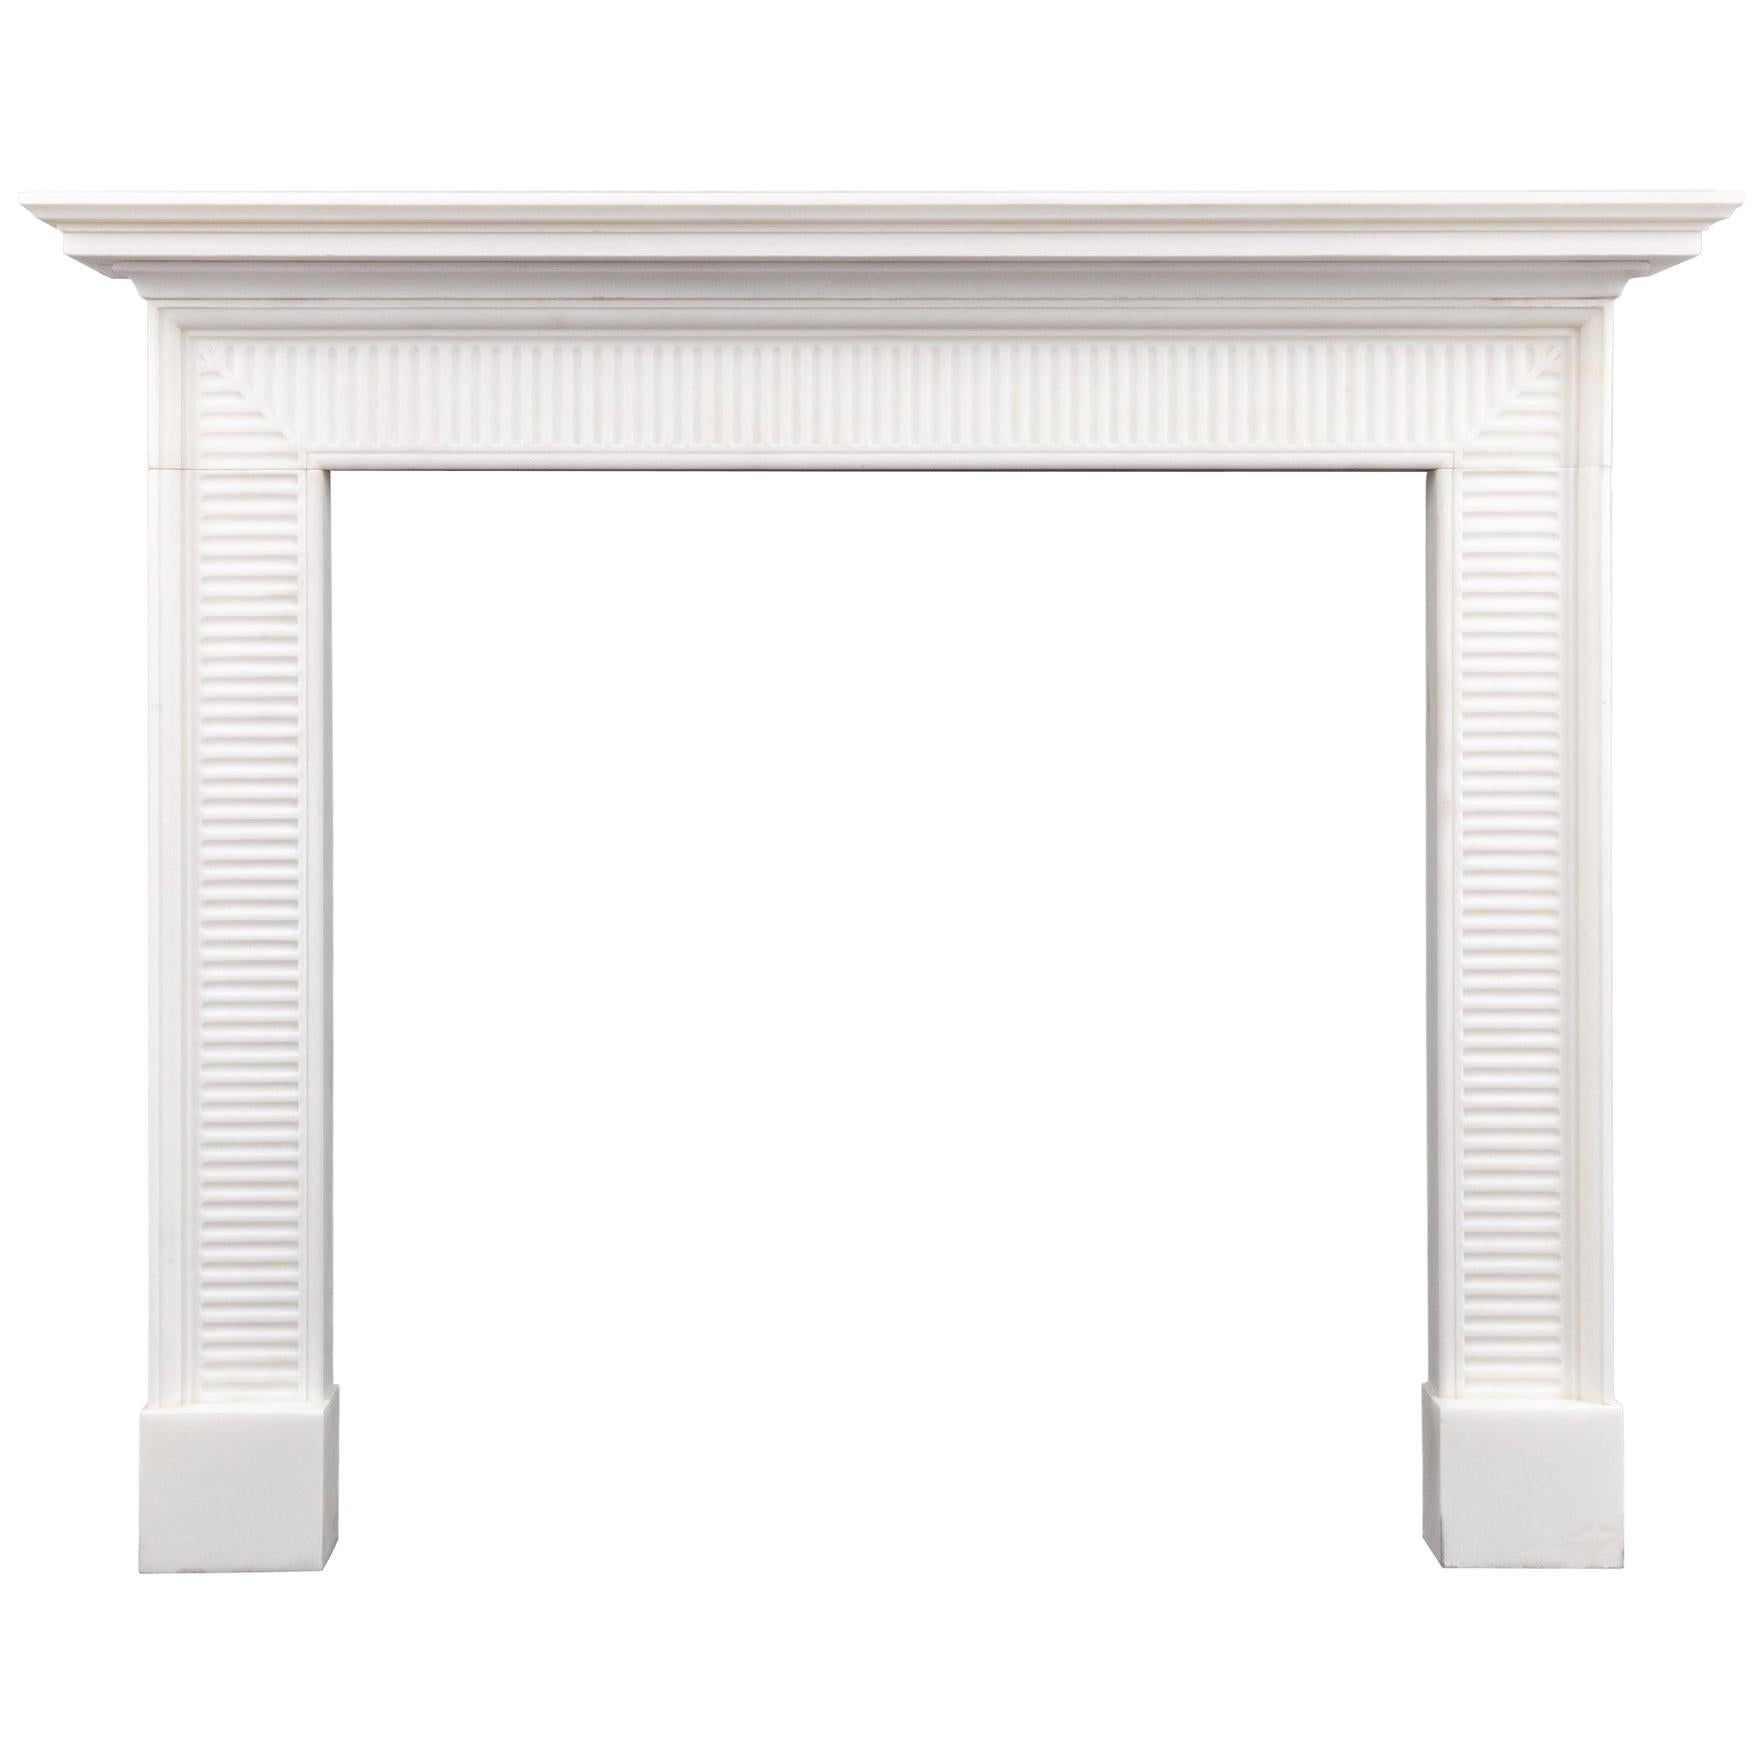 Georgian Style Marble Fireplace For Sale